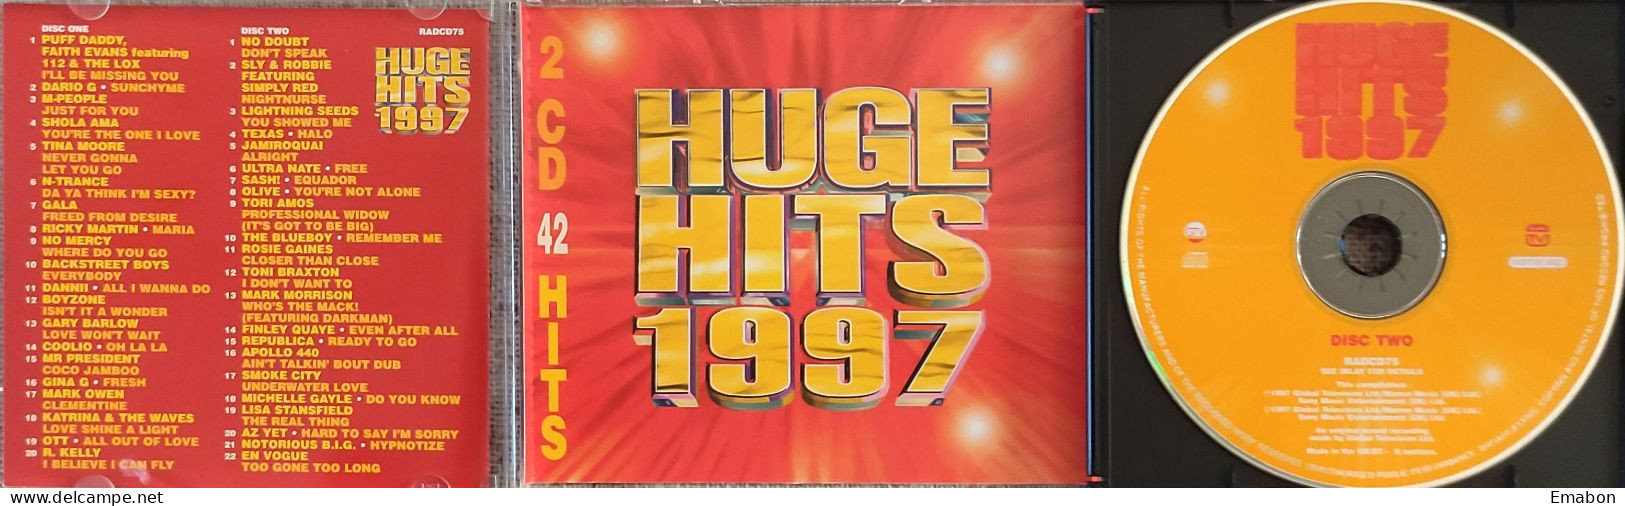 BORGATTA - HITS - 2 Cd  HUGE HITS 1997 - 42 OF THE BIGGEST HITS OF THE YEAR  - GLOBAL  1997 - USATO In Buono Stato - Collector's Editions